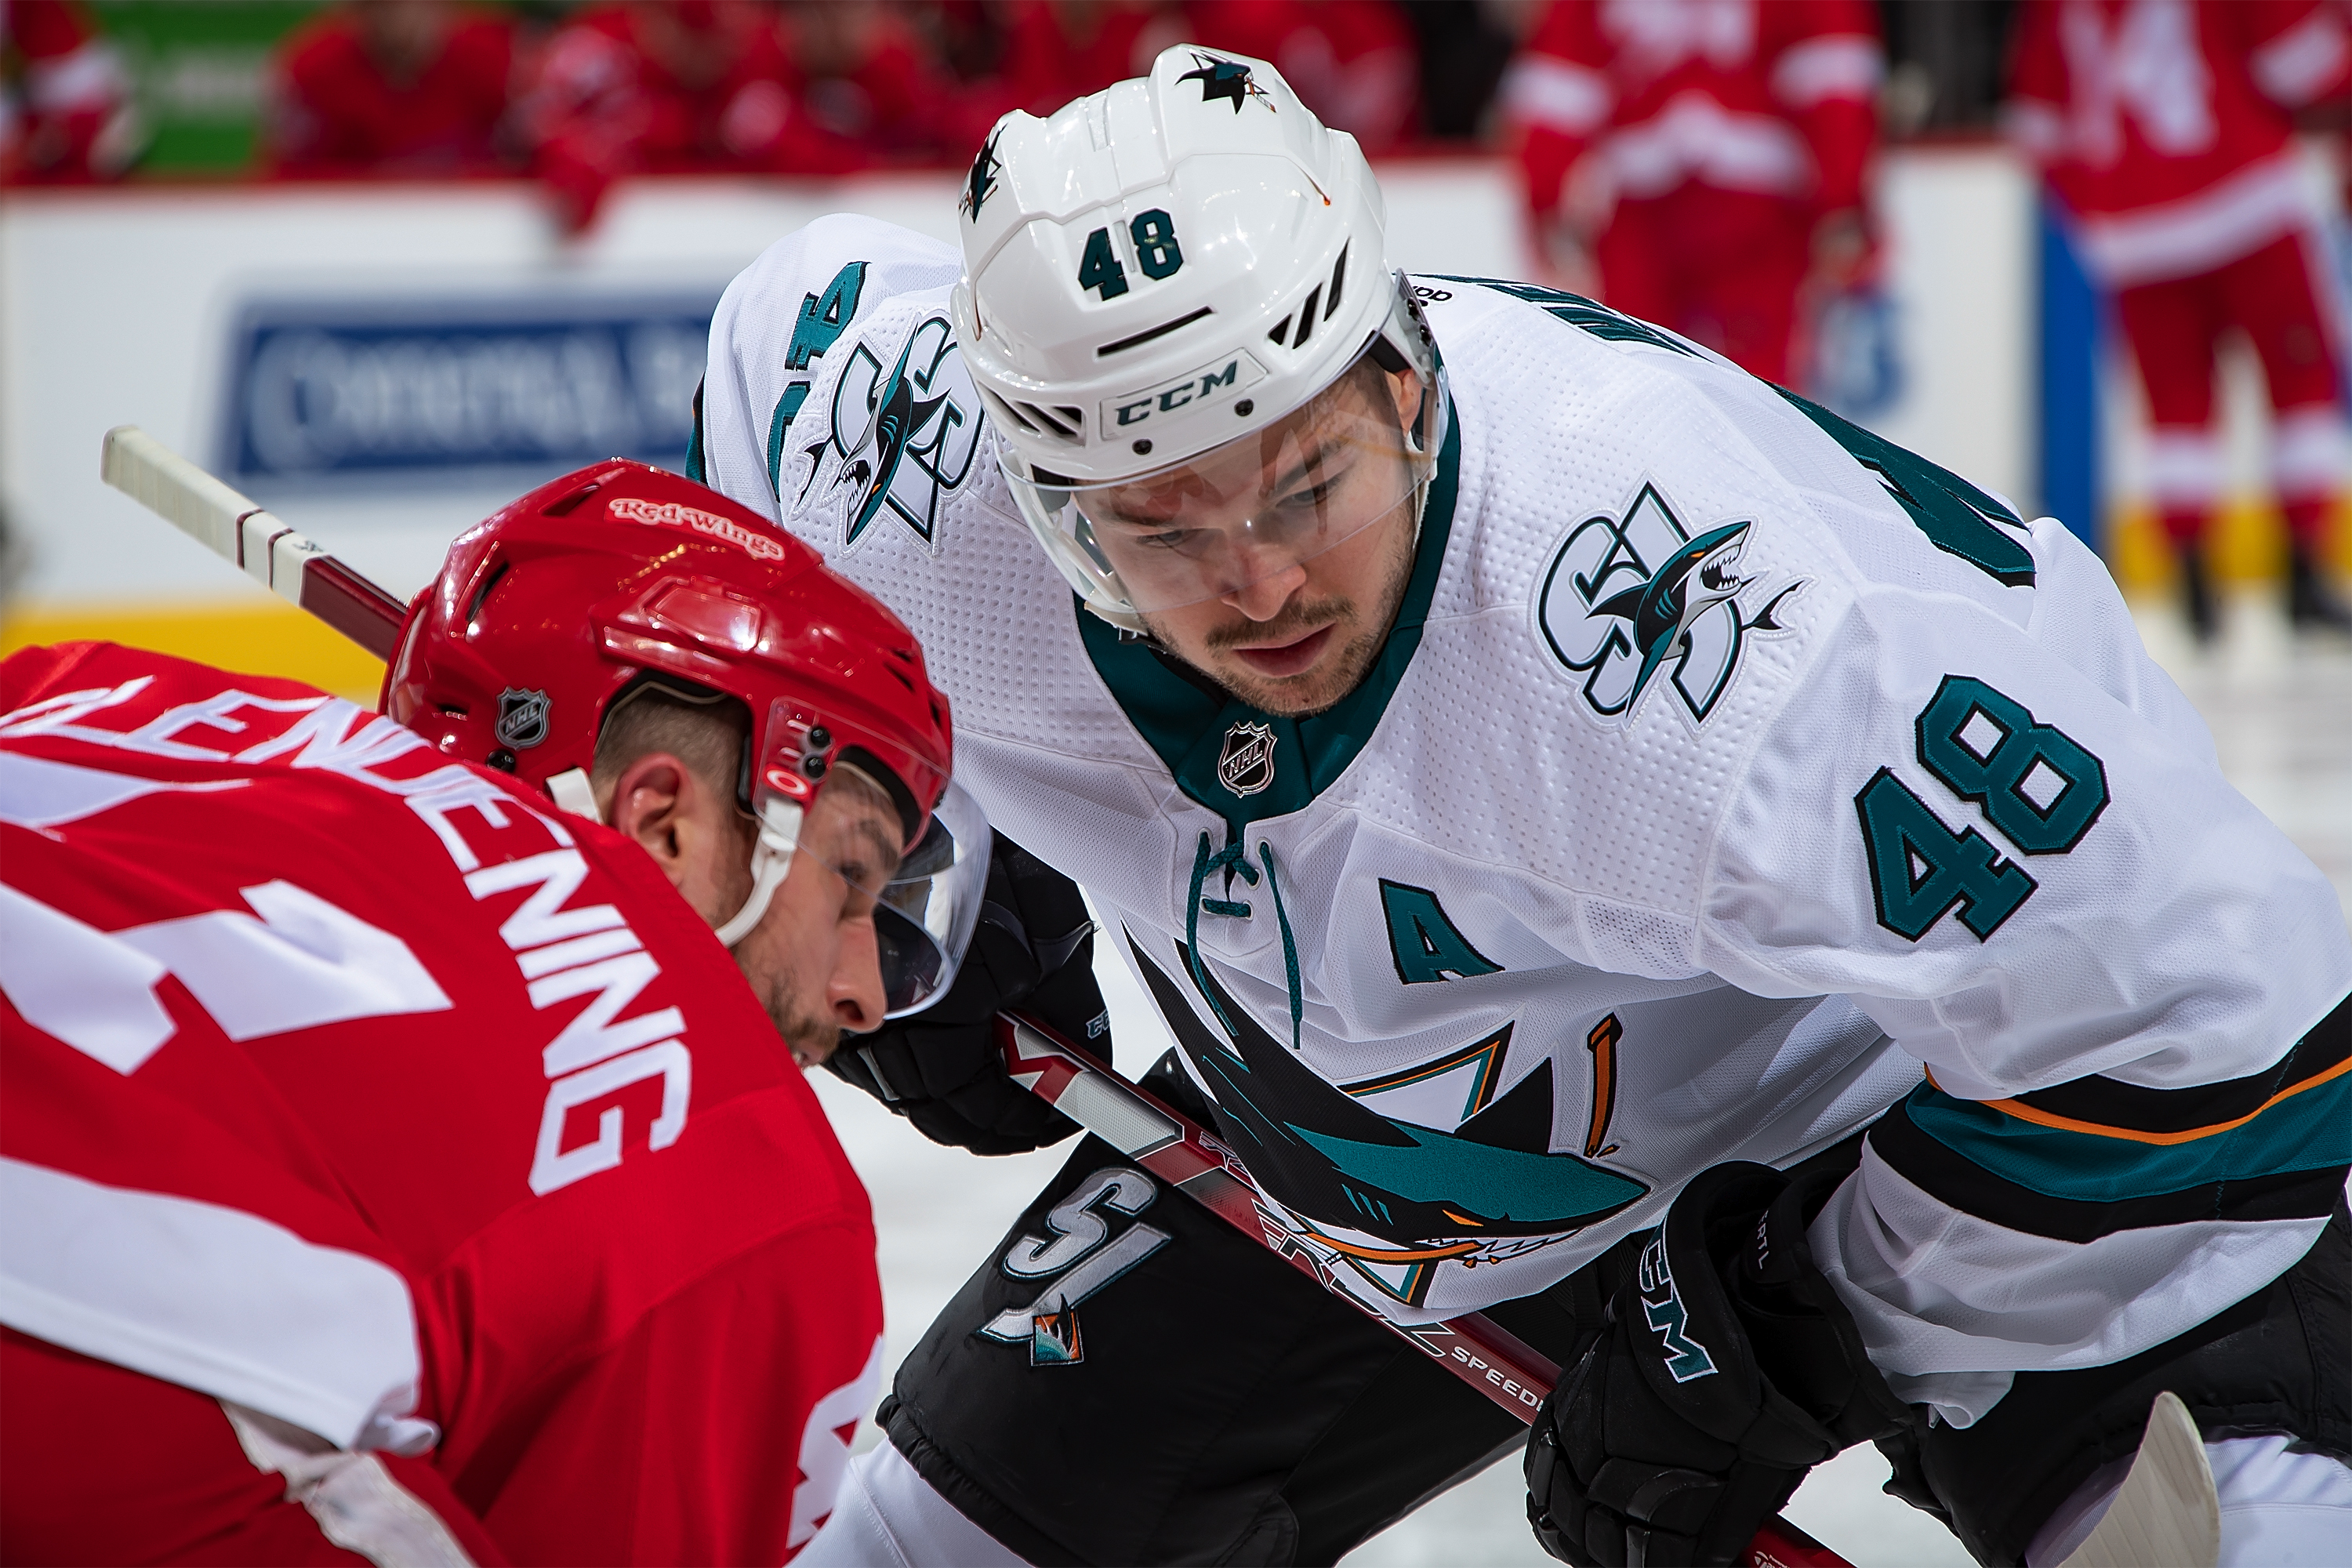 Tomas Hertl #48 of the San Jose Sharks faces off against Luke Glendening #41 of the Detroit Red Wings during an NHL game at Little Caesars Arena on December 31, 2019 in Detroit, Michigan. The Wings defeated the Sharks 2-0.